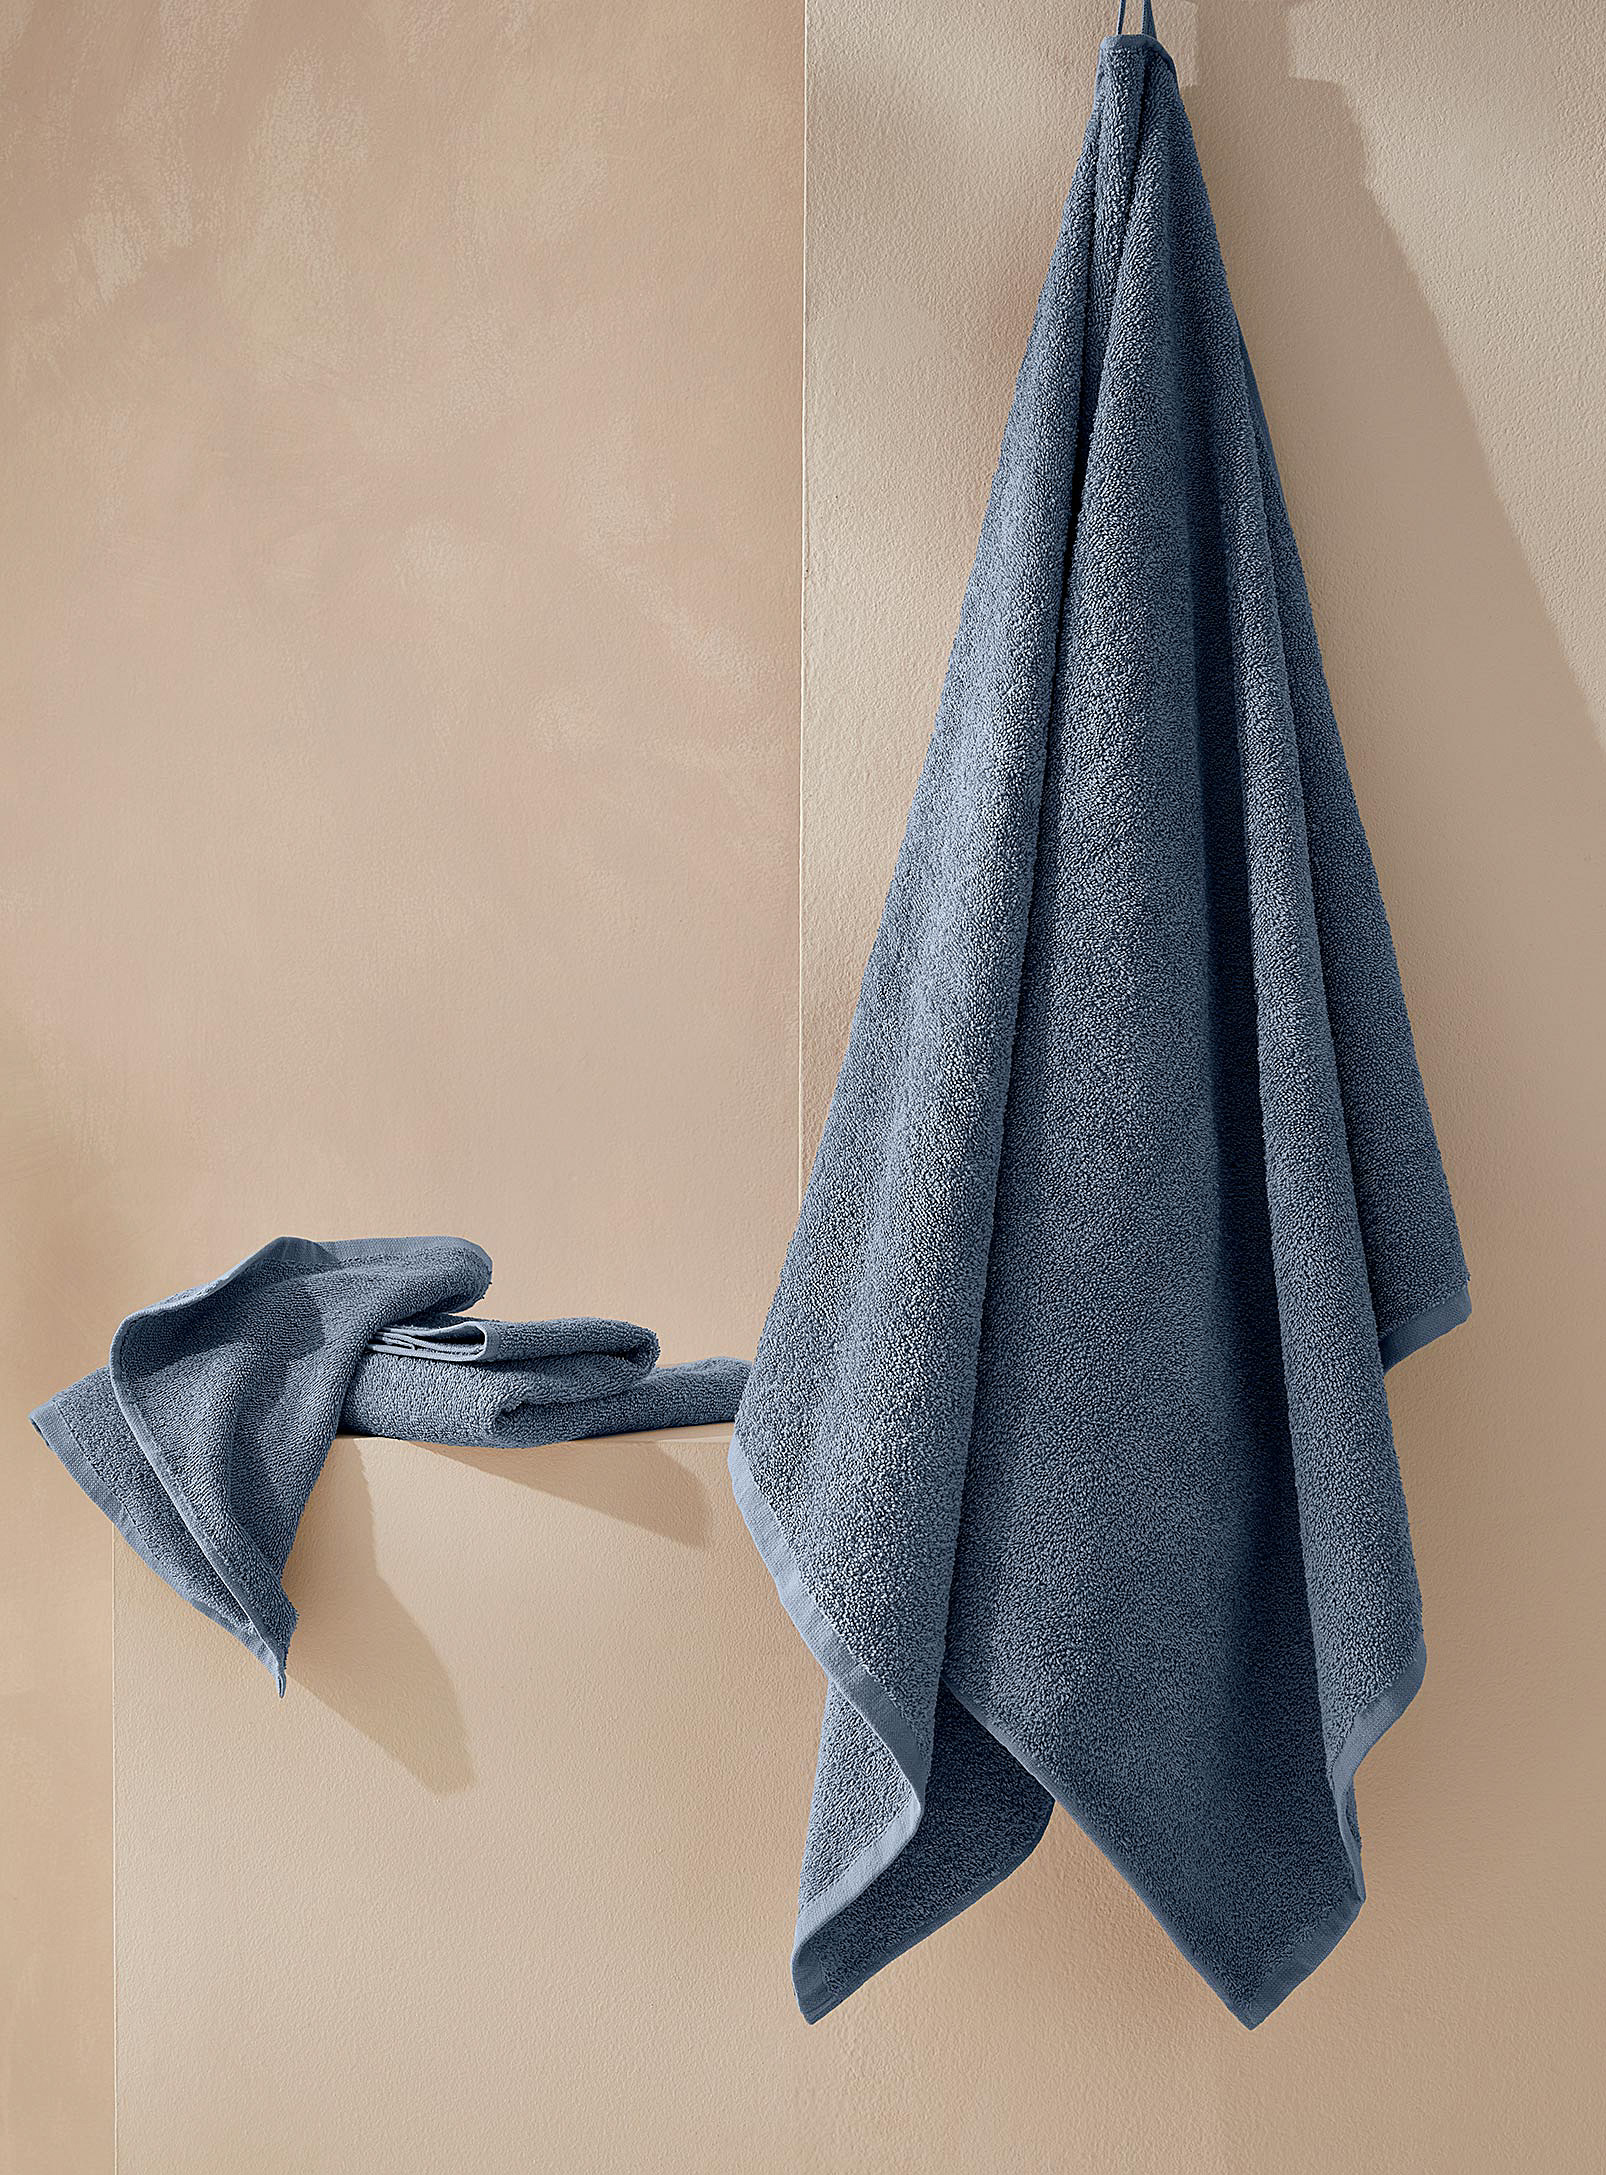 Simons Maison Quick-drying Daily Organic Cotton Towels Lightweight, Eco-friendly Fibre In Blue